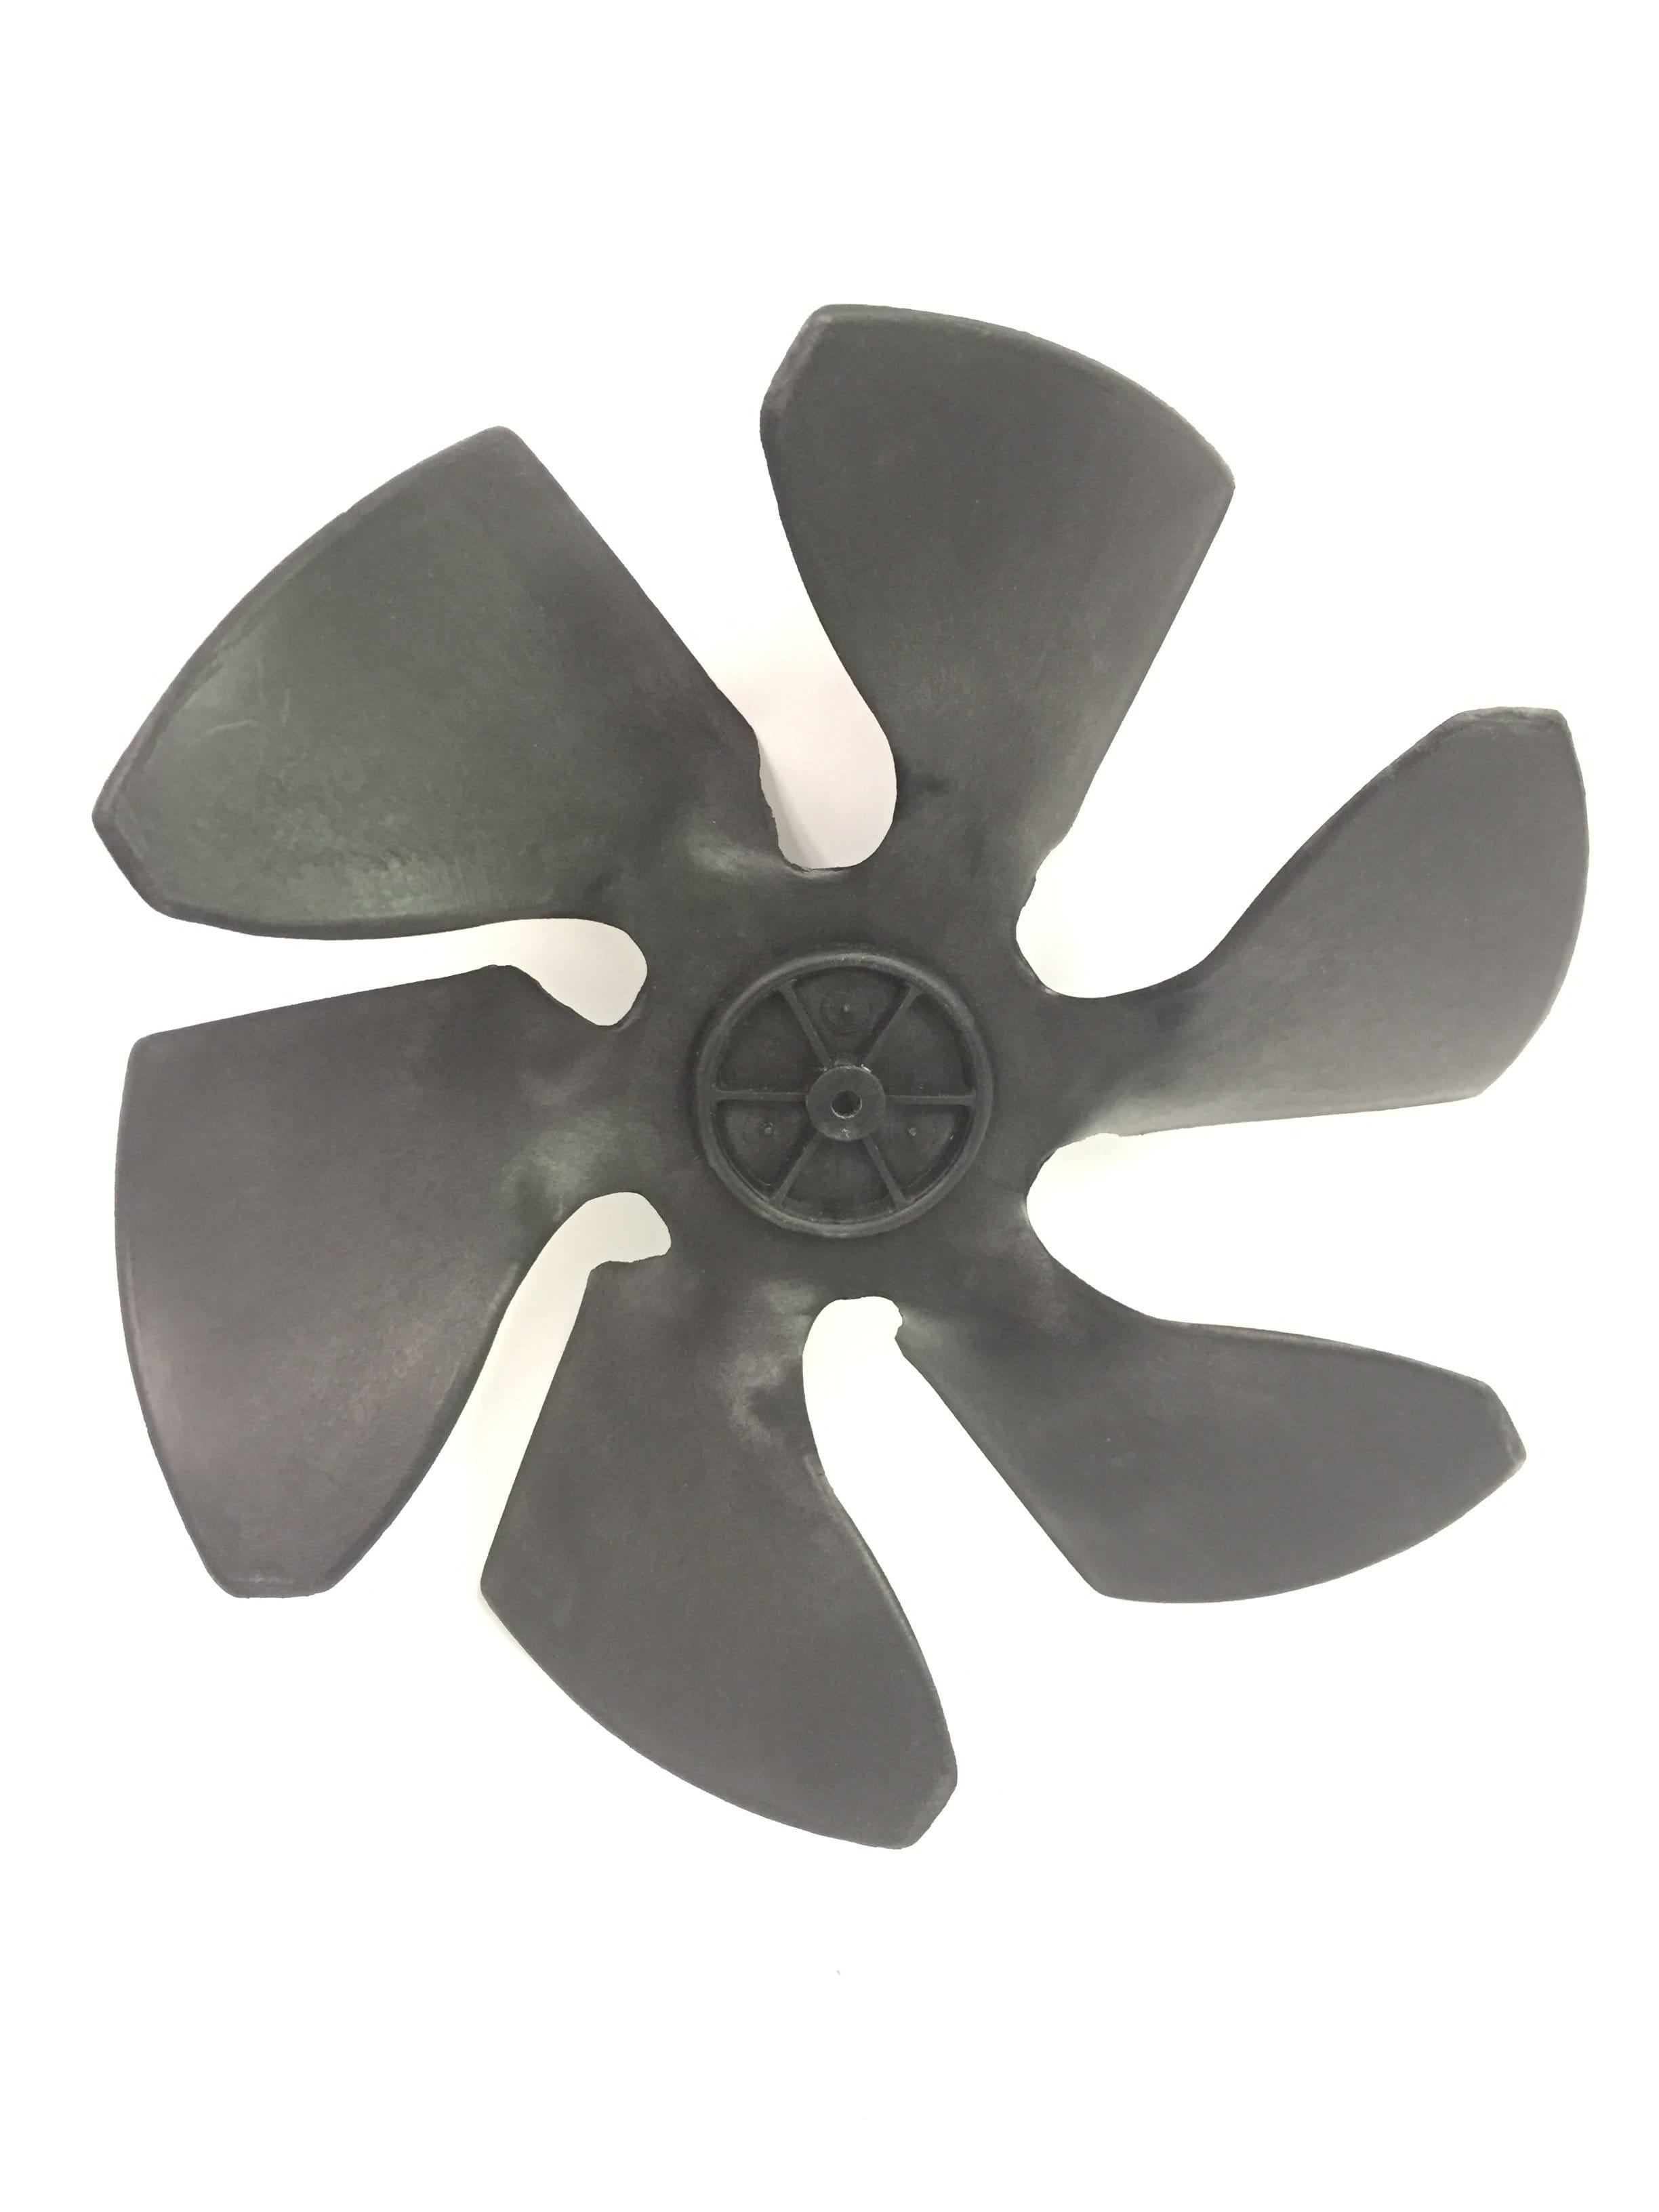 Atwood 15056 Condenser Fan